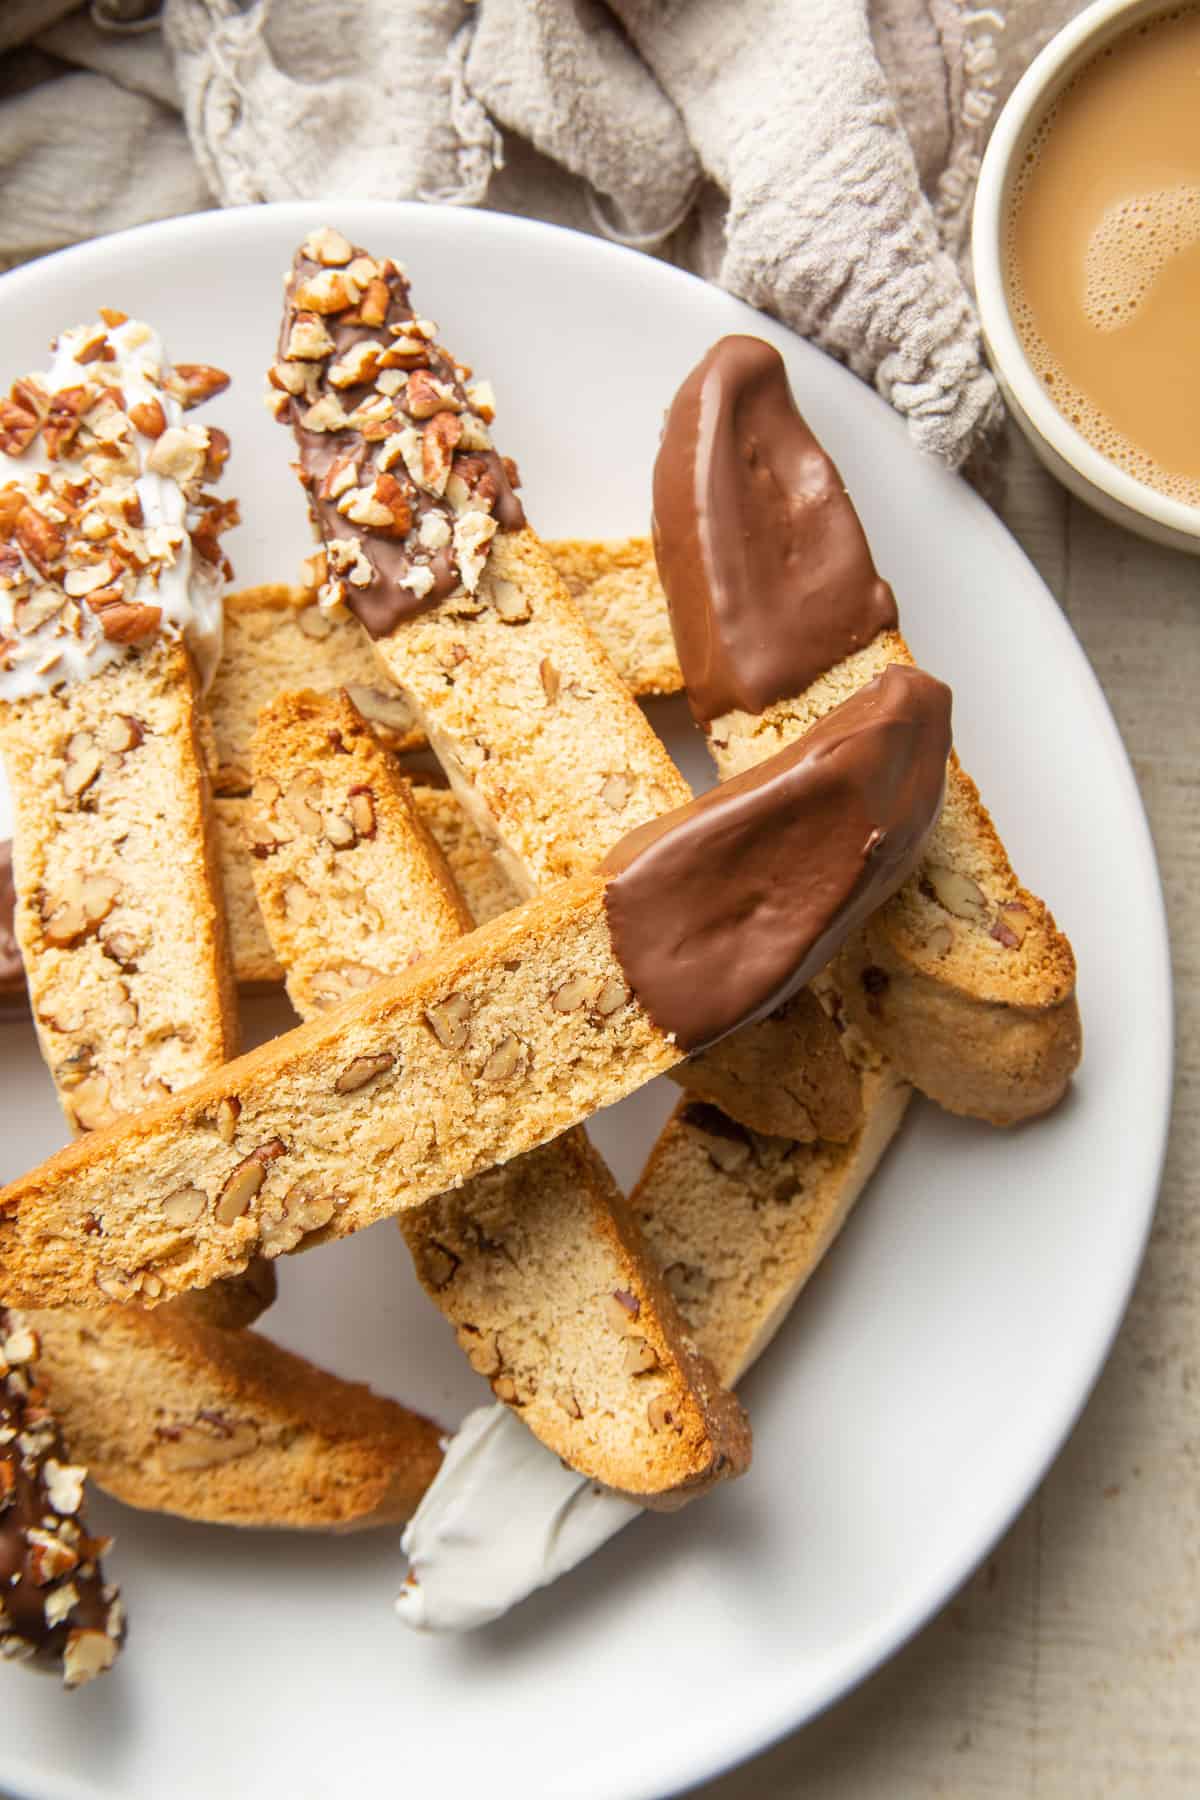 Plate of Vegan Biscotti with coffee cup on the side.